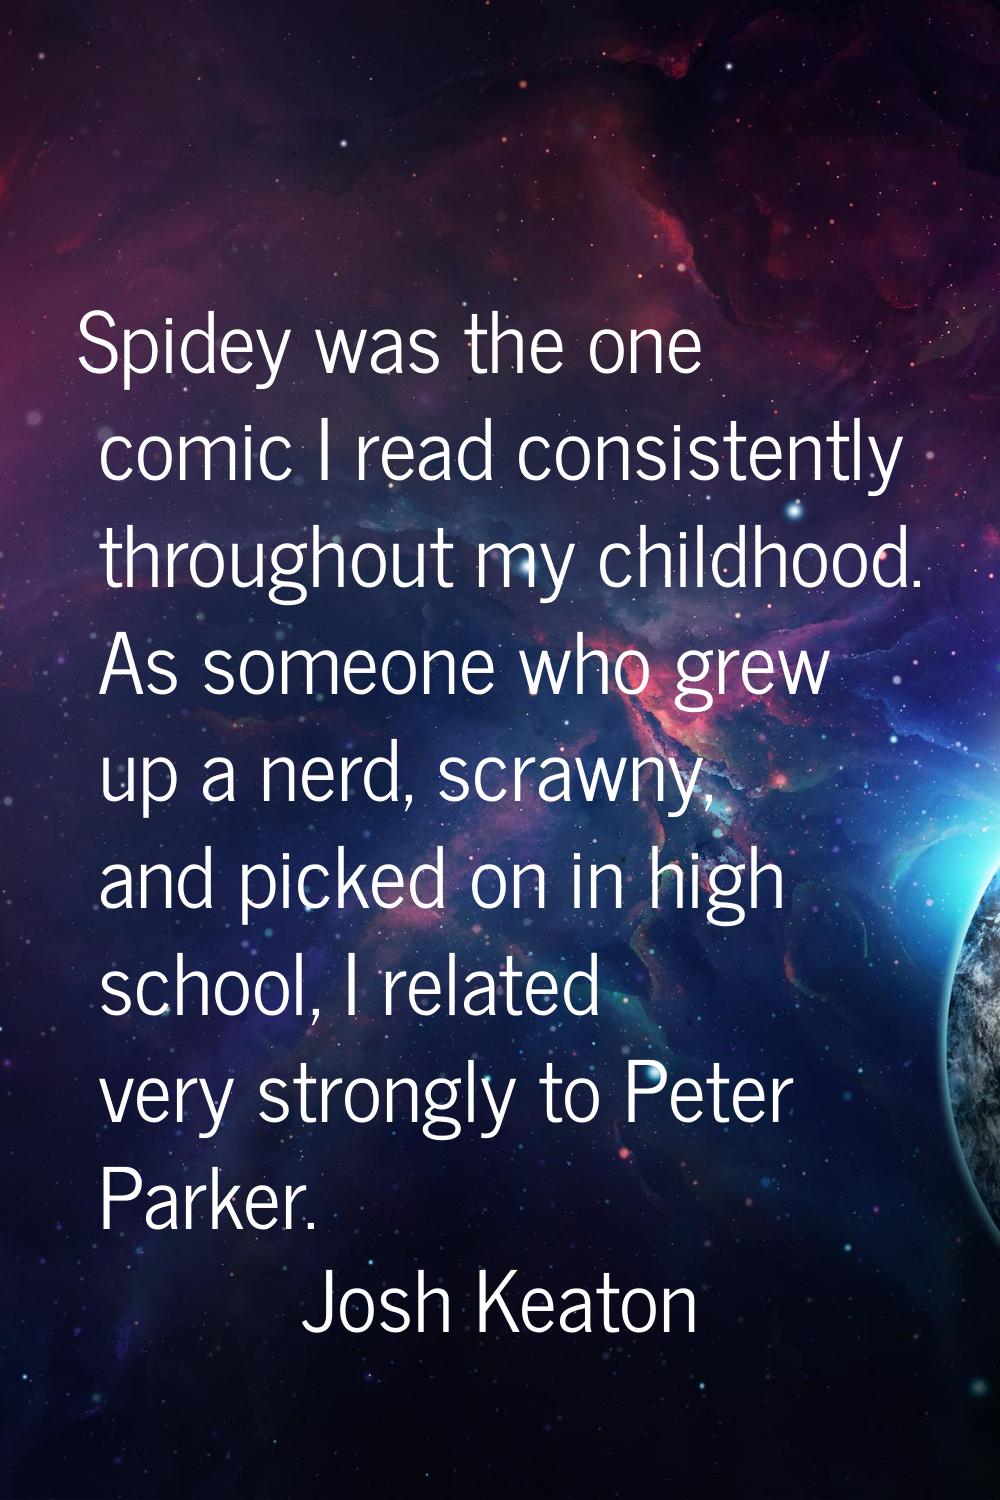 Spidey was the one comic I read consistently throughout my childhood. As someone who grew up a nerd